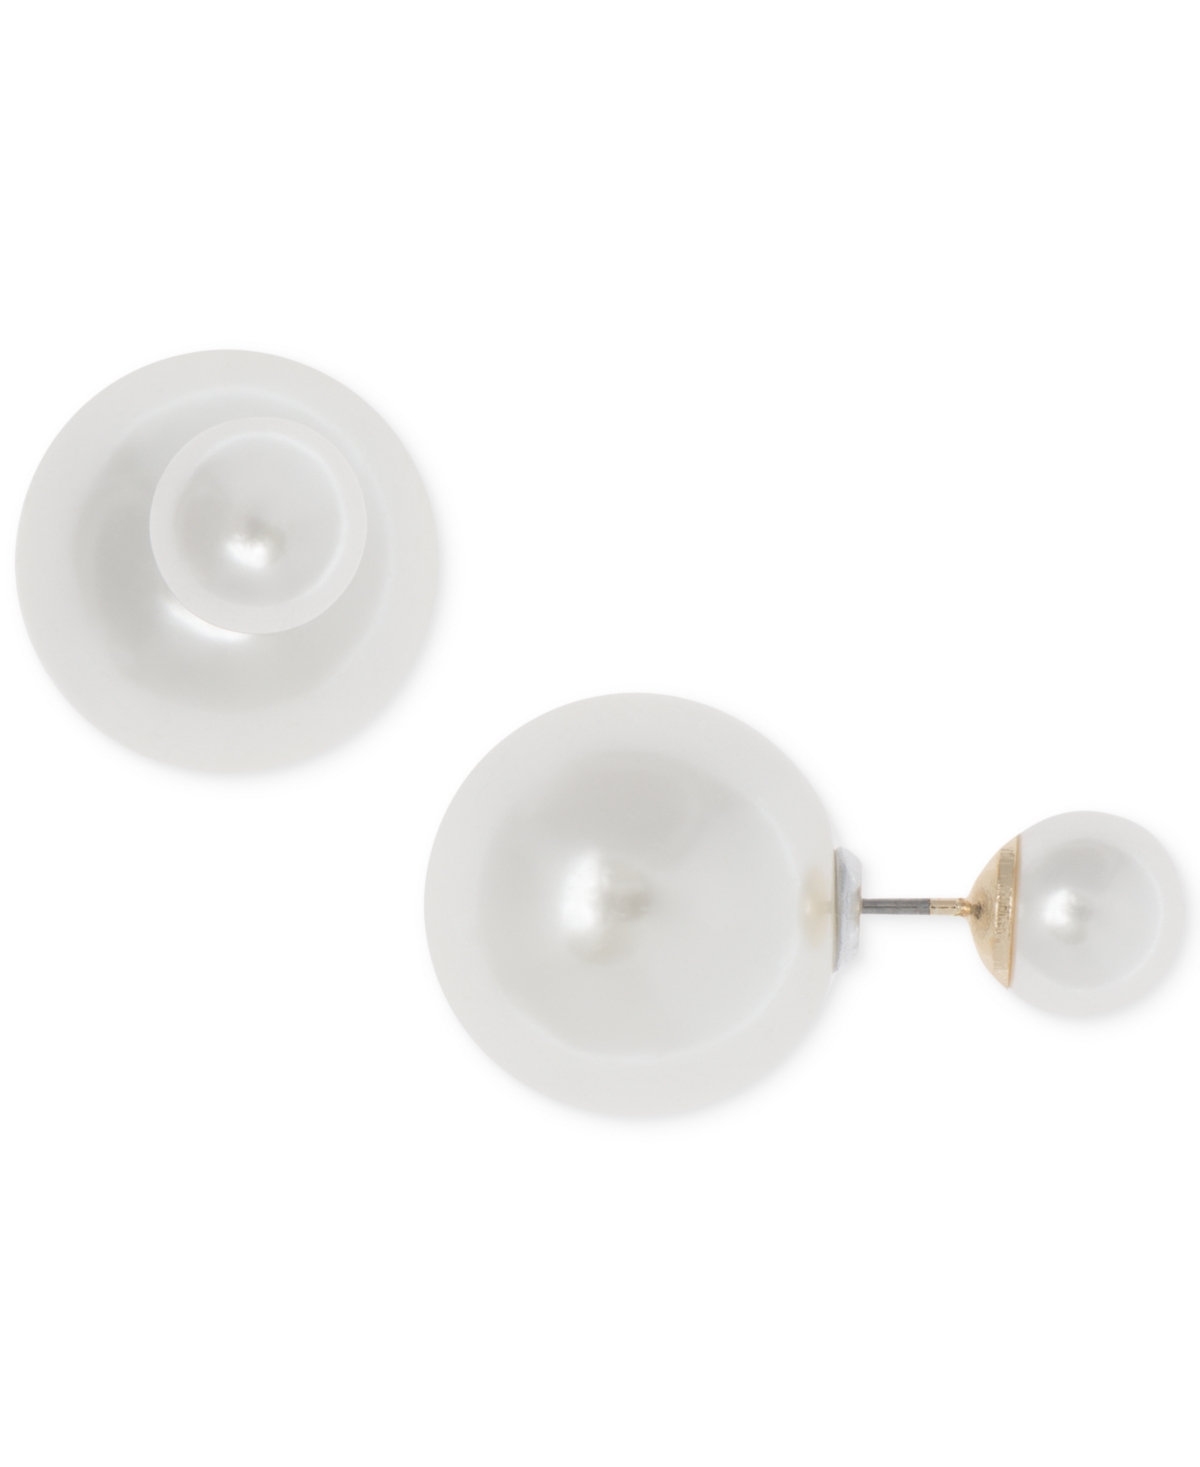 Gold-Tone Imitation Pearl Front Back Earrings - White